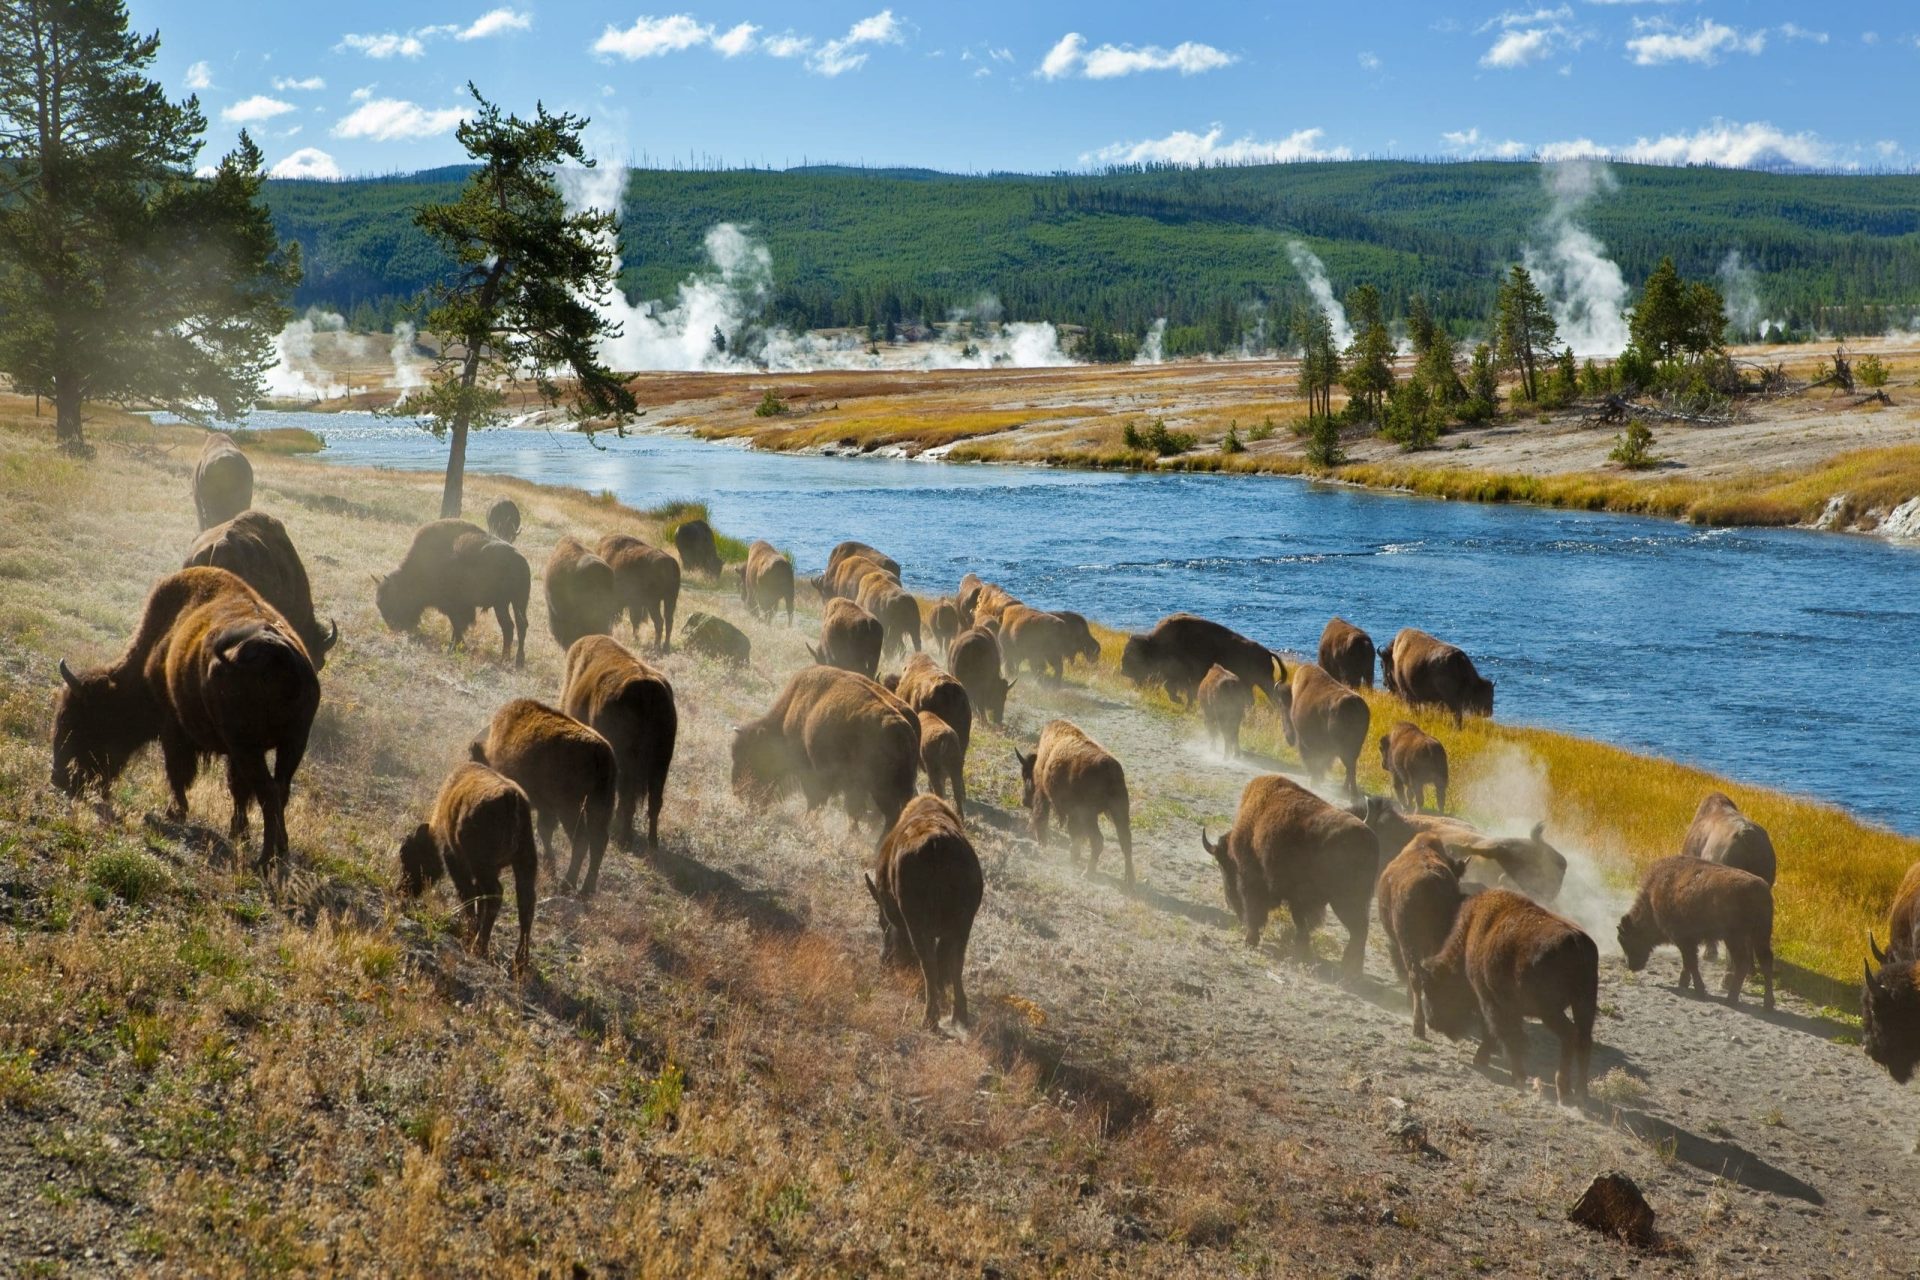 Plan your visit to Yellowstone National Park